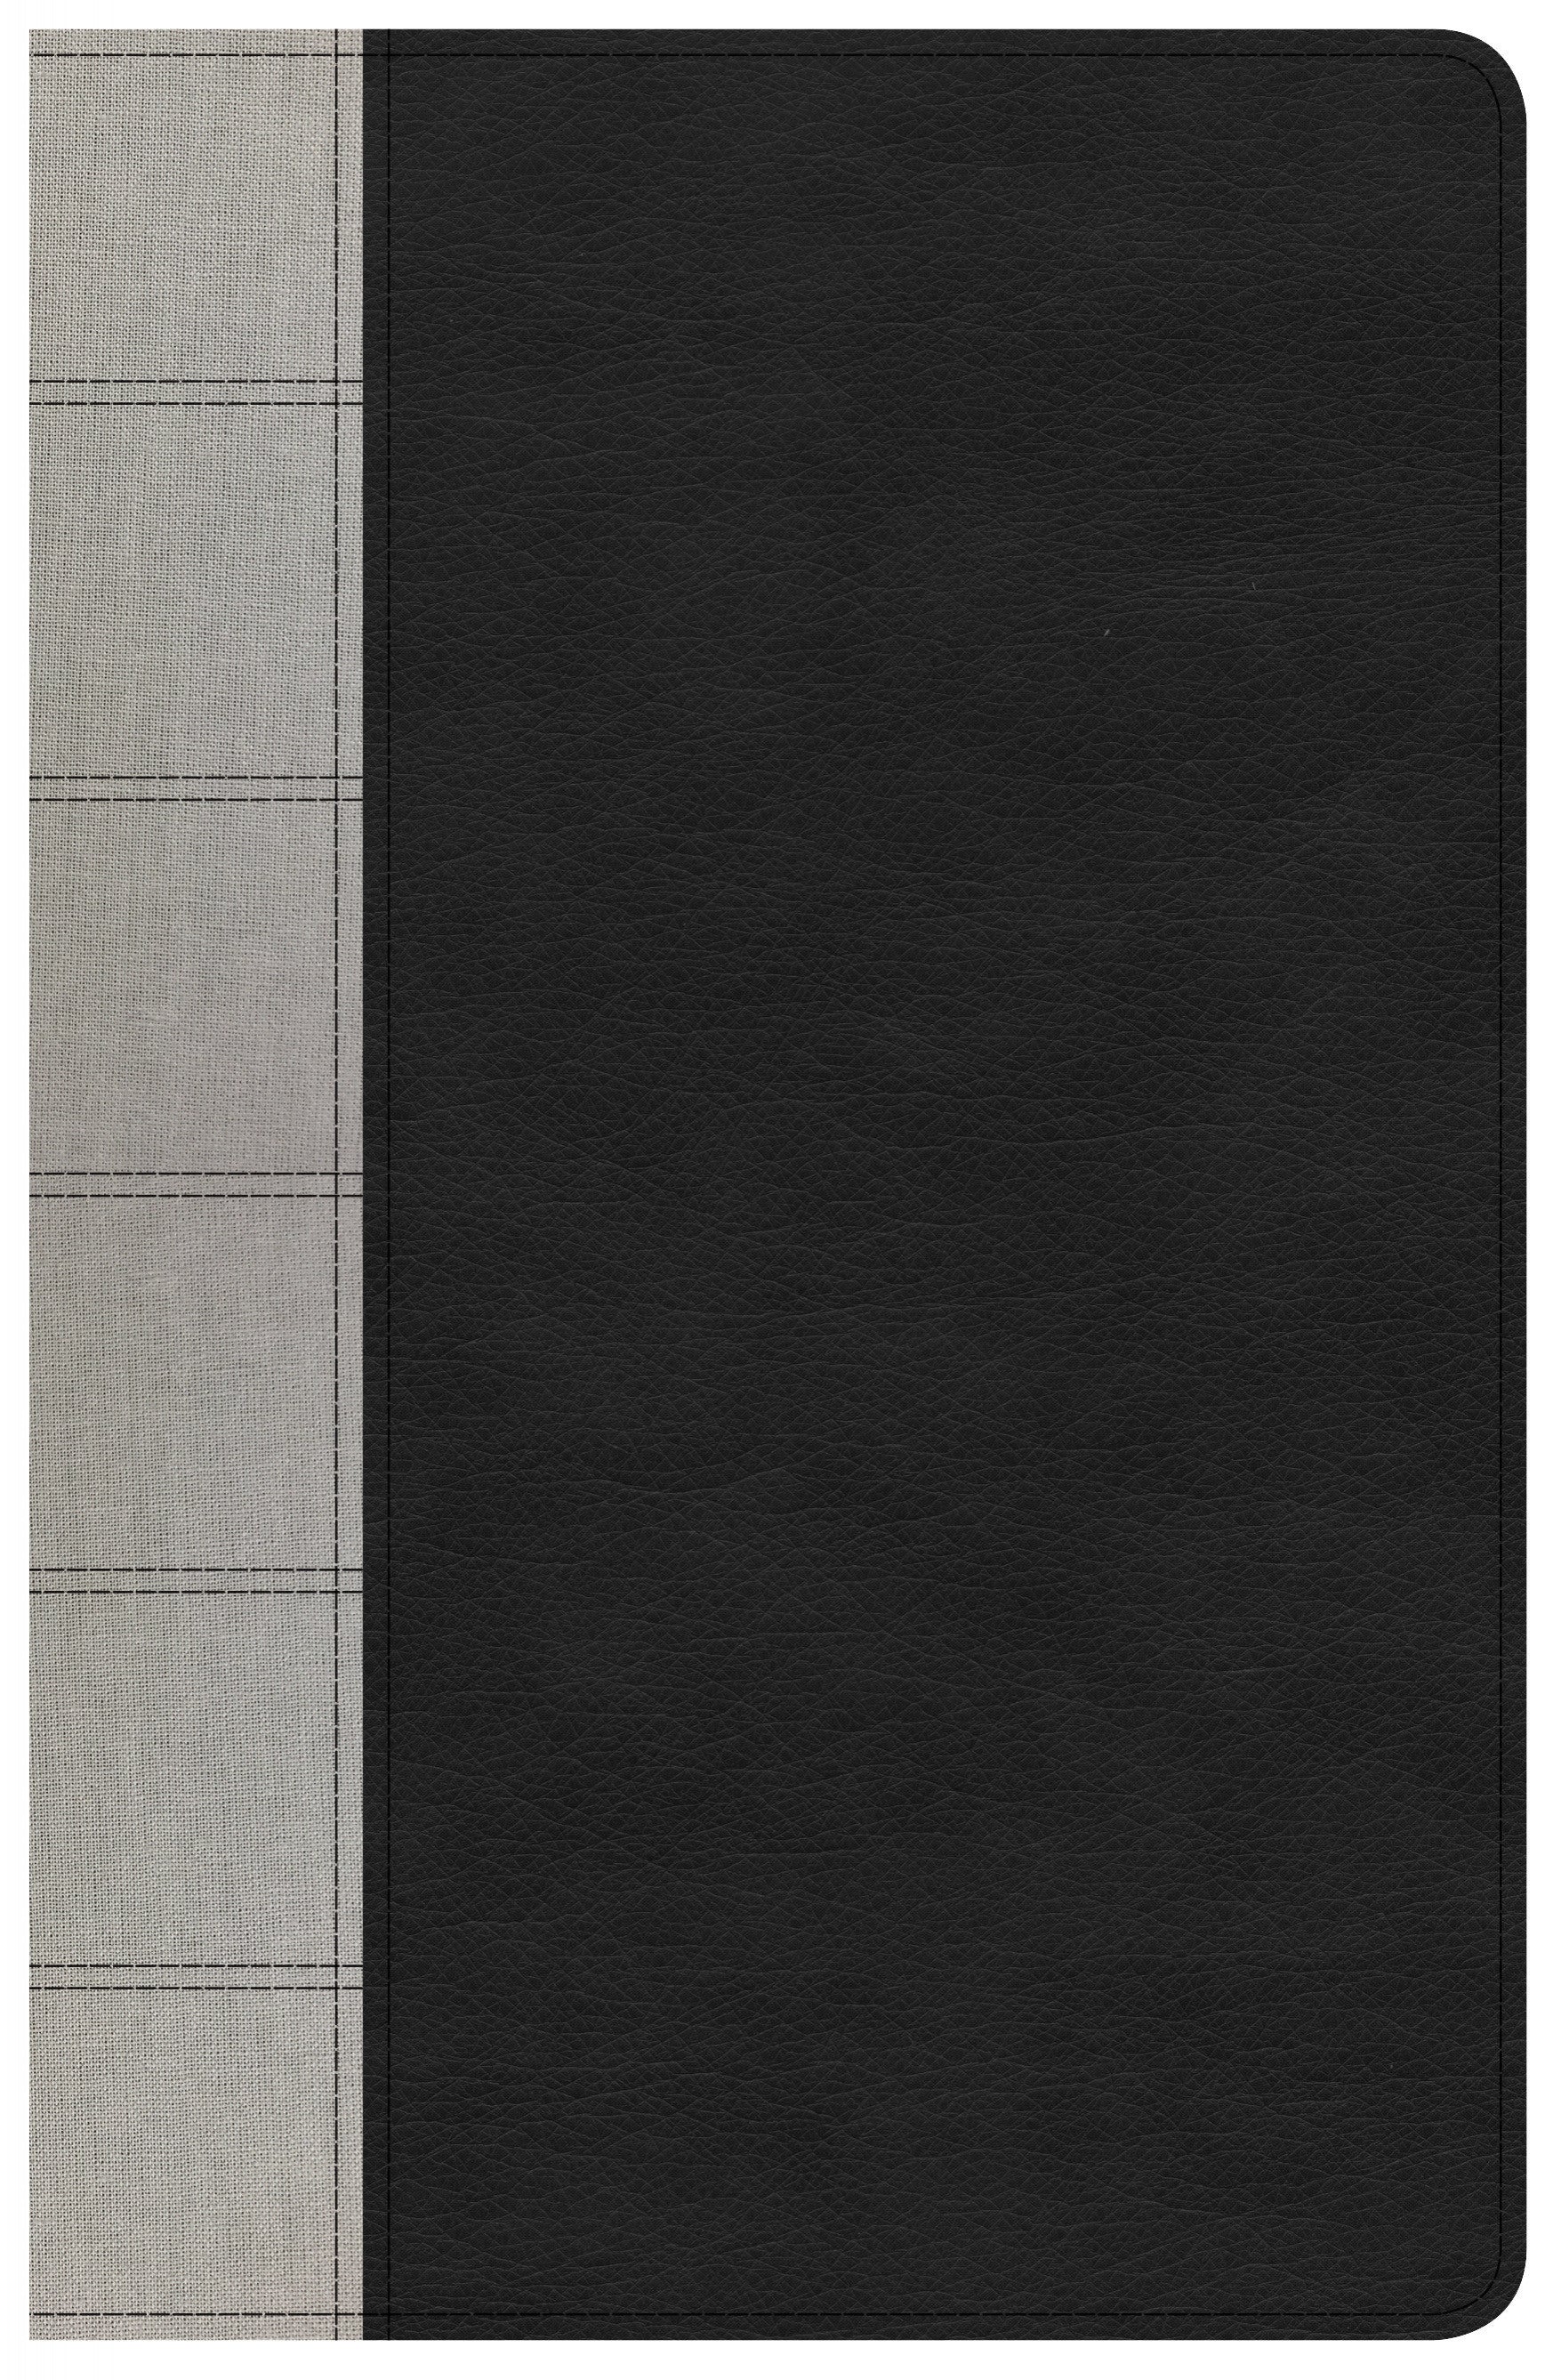 Image of NKJV Large Print Personal Size Reference Bible, Black/Gray other